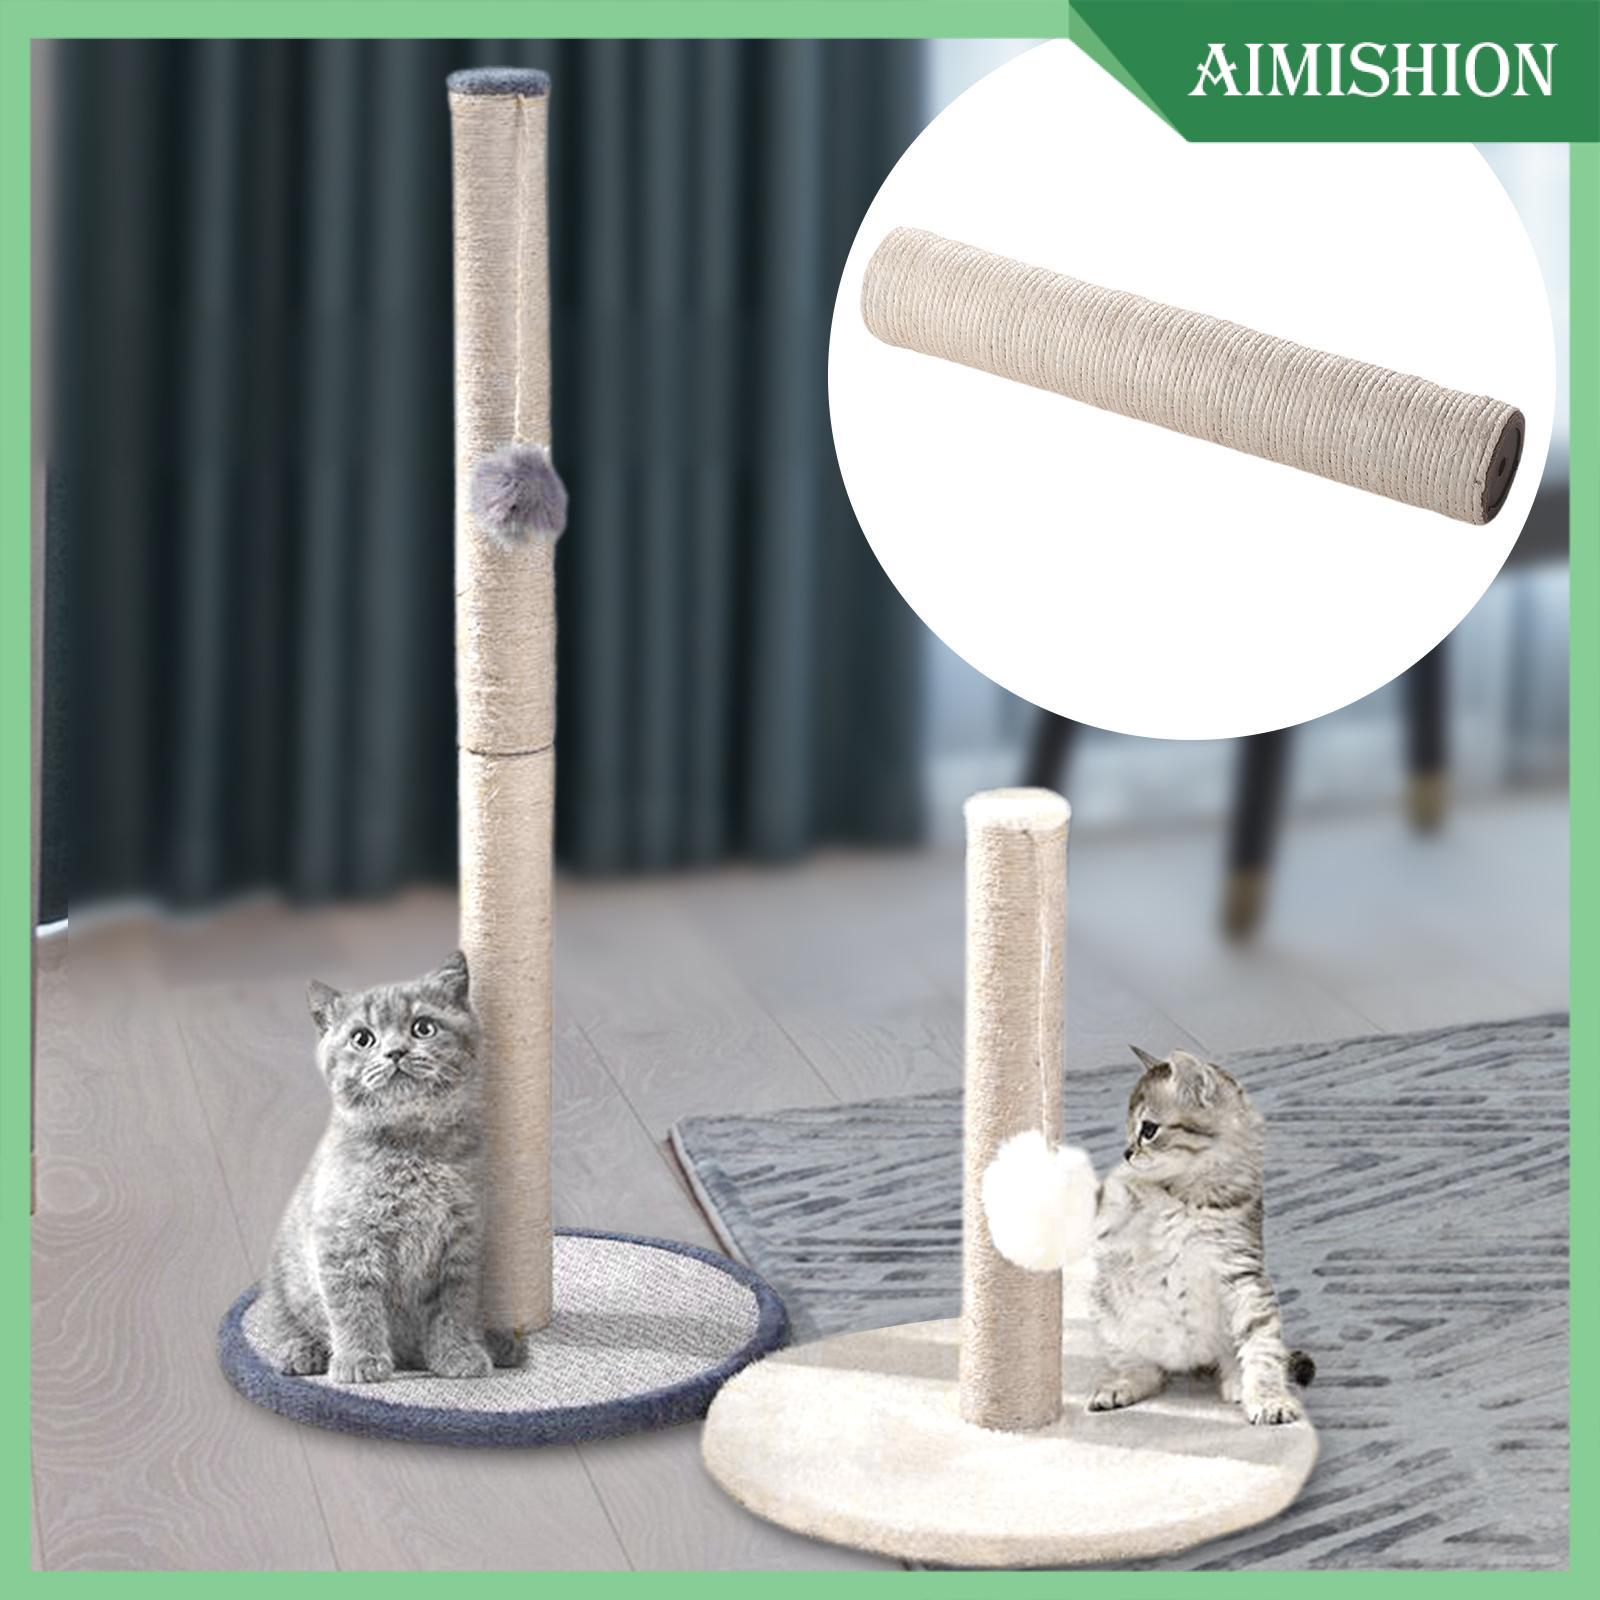 Aimishion Cat Scratching Post Replacement Wear Resistant Furniture